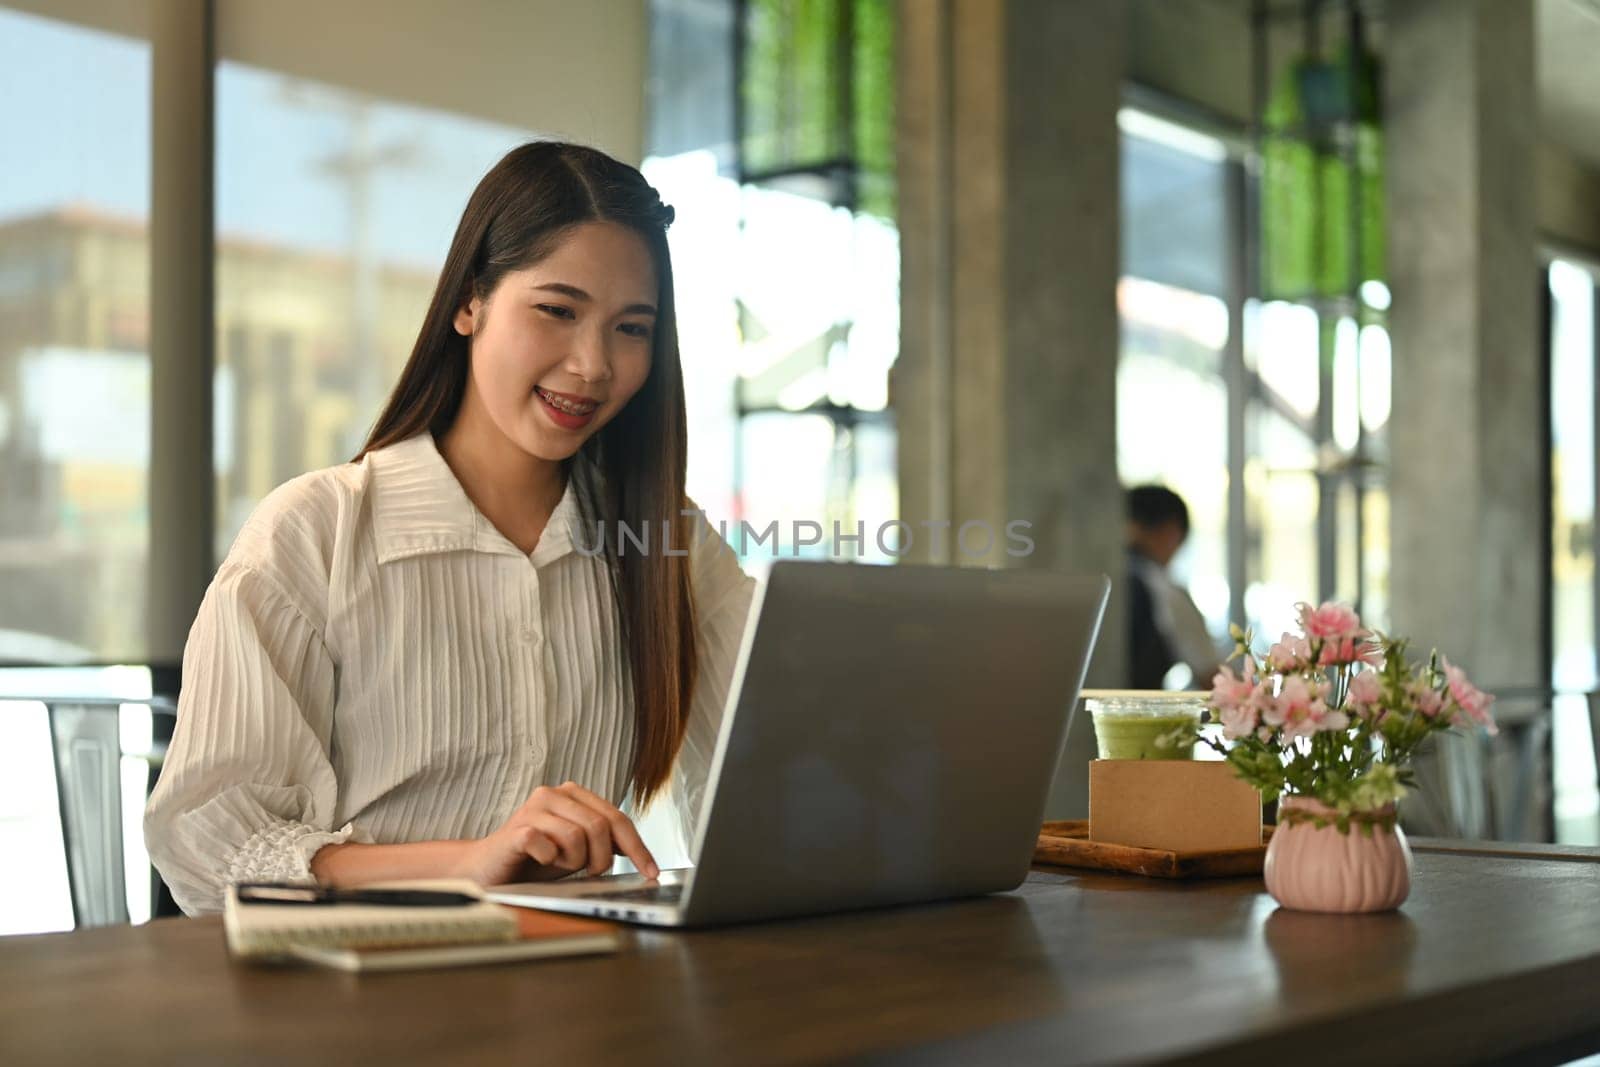 Smiling businesswoman using laptop on wooden table at coffee shop during working remotely.